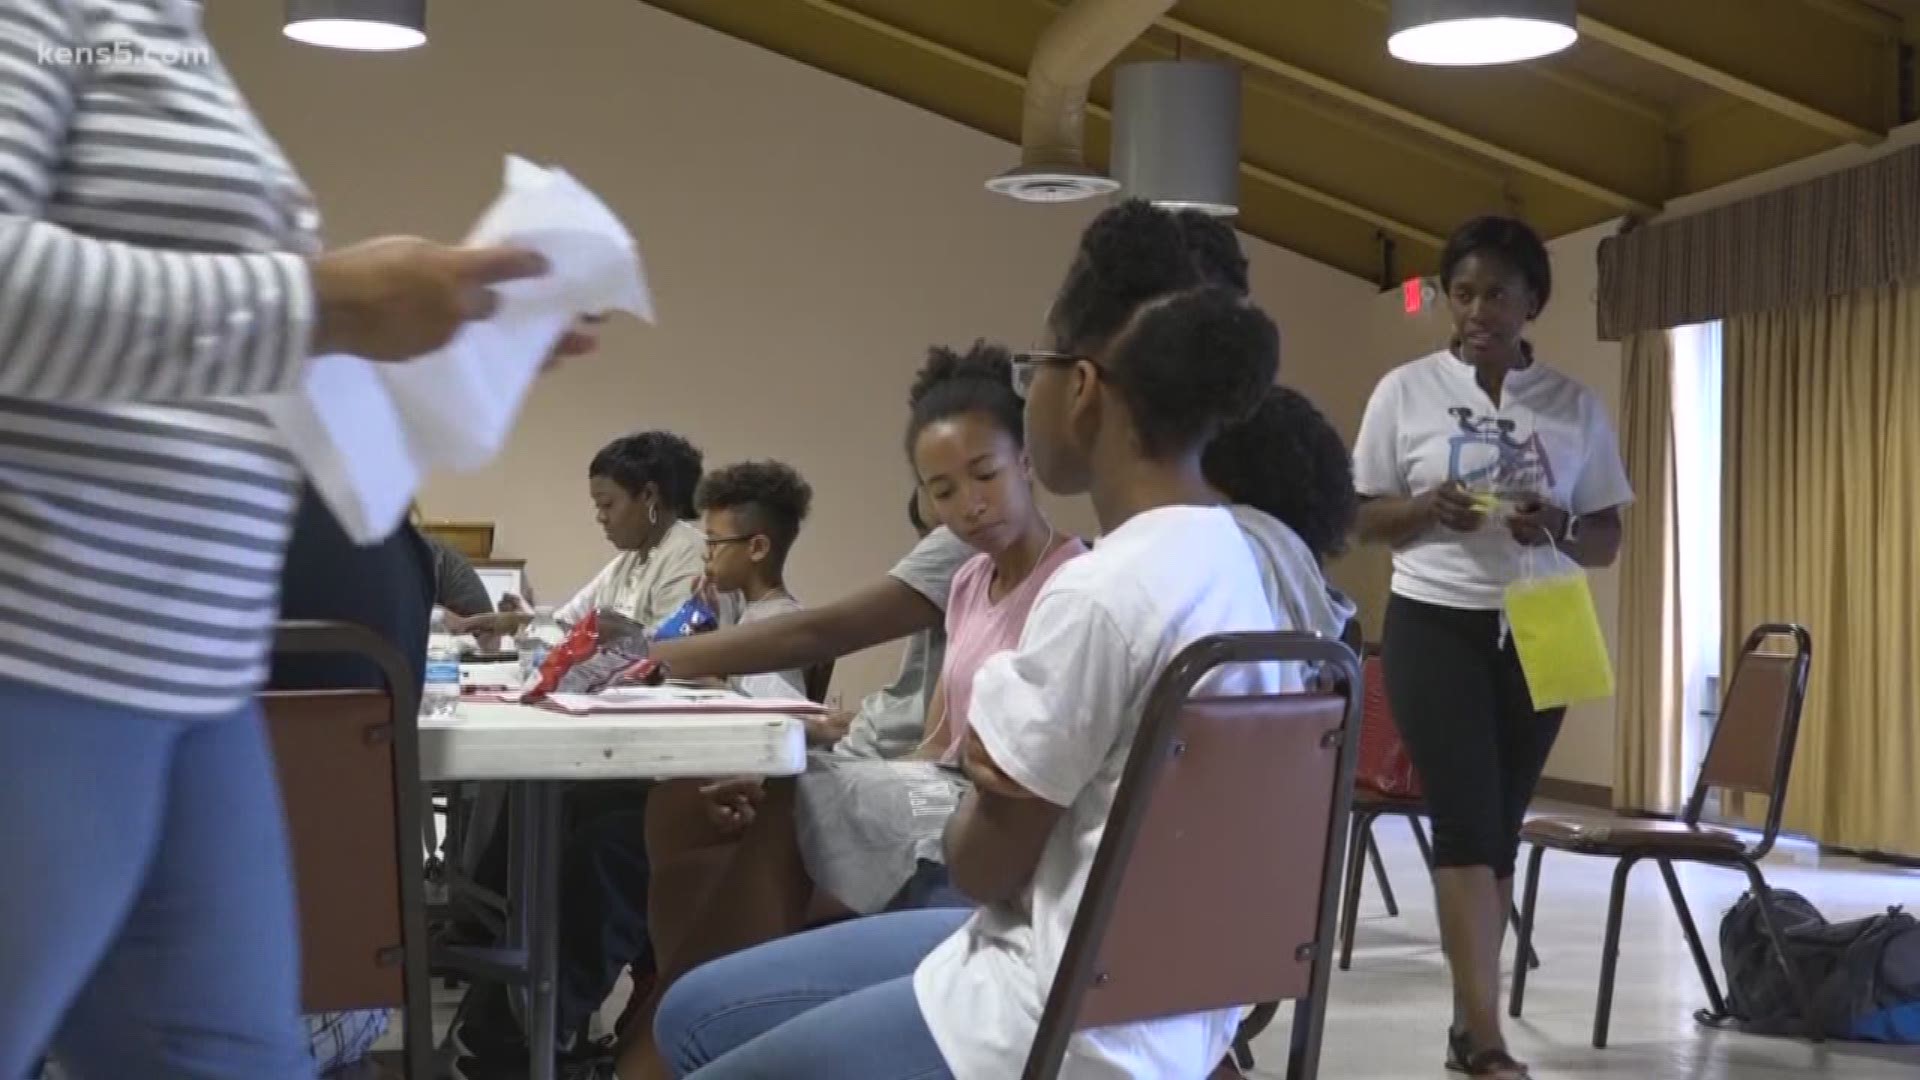 Kids on San Antonio's east side don't have to worry about being bored this summer. A group of parents is bringing students together to learn skills that will help them in high school and beyond. Eyewitness News reporter Savannah Louie has the story.